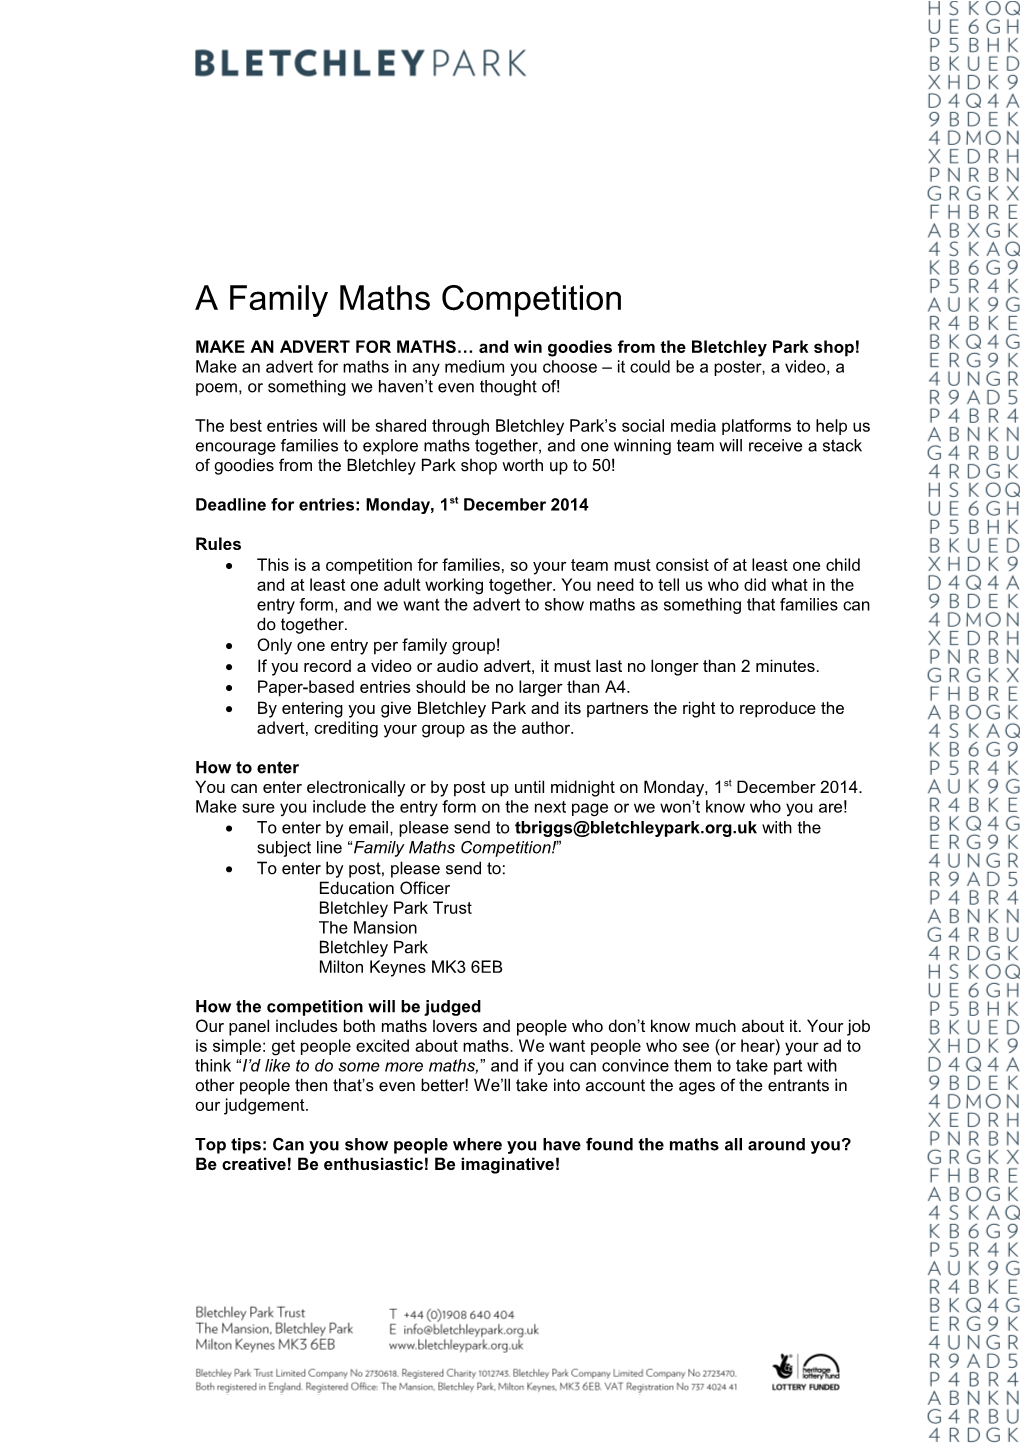 MAKE an ADVERT for MATHS and Win Goodies from the Bletchley Park Shop!